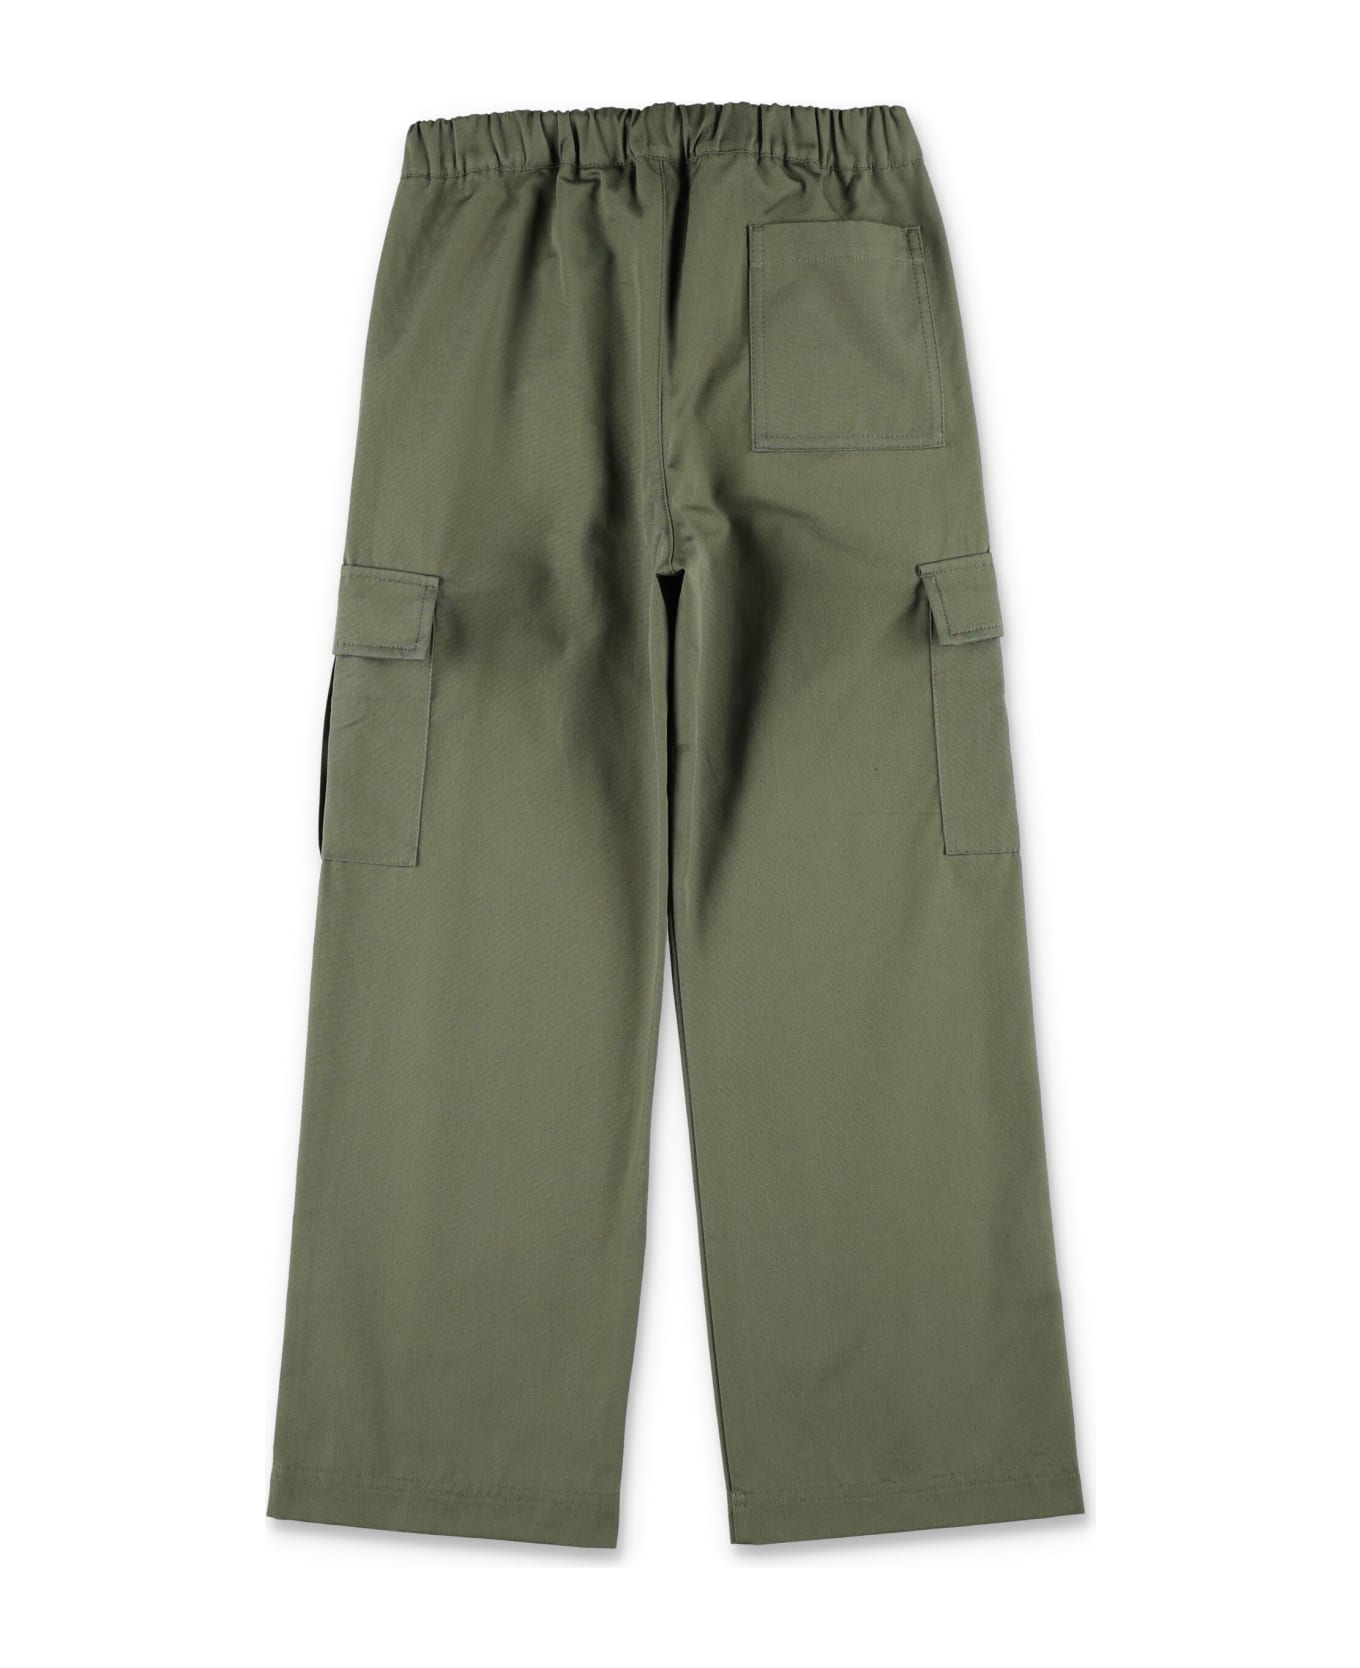 Off-White Pants Cargo - GREEN ボトムス